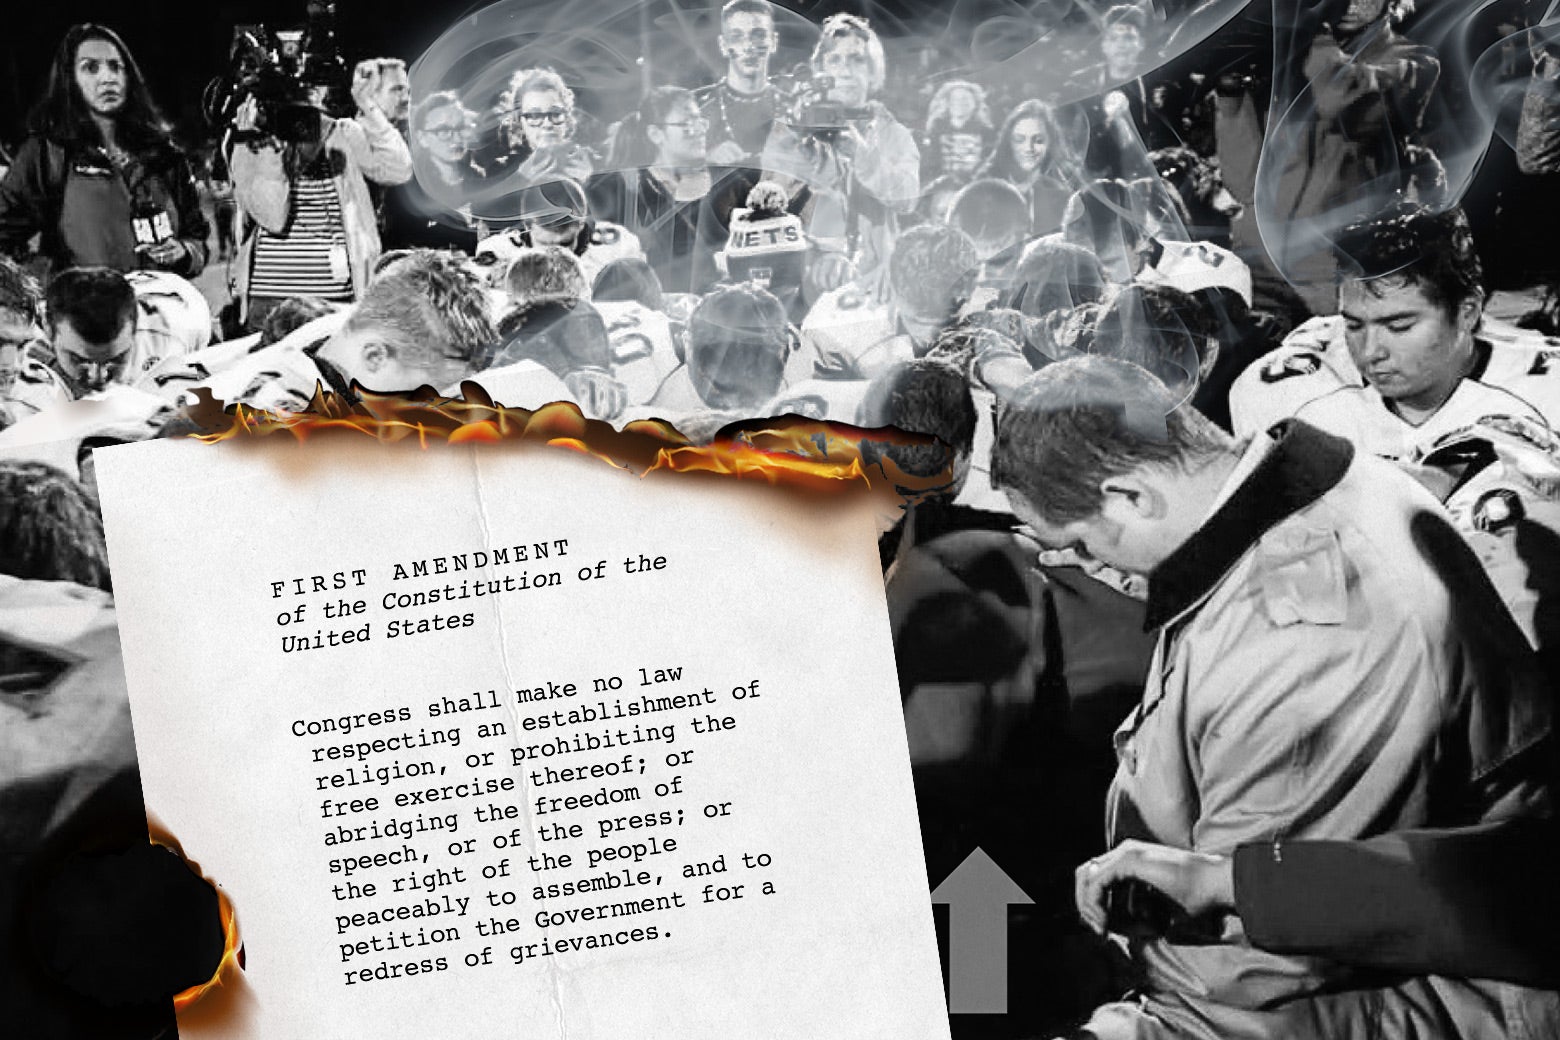 The First Amendment in flames, in front of a black-and-white photo of high school football players praying.